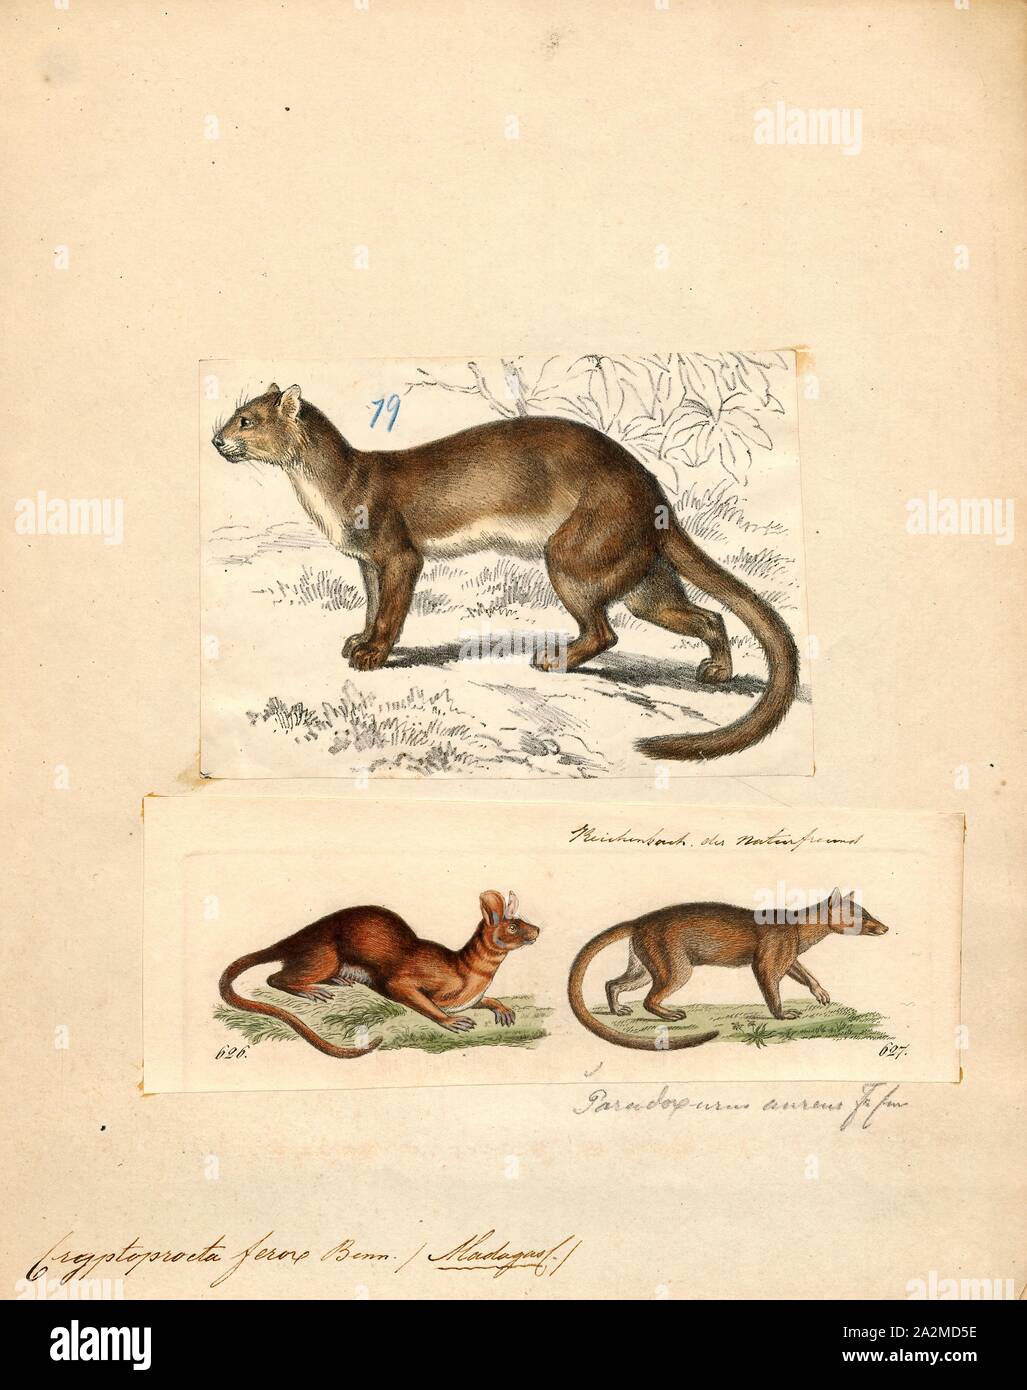 Cryptoprocta ferox, Print, The fossa is a cat-like, carnivorous mammal endemic to Madagascar. It is a member of the Eupleridae, a family of carnivorans closely related to the mongoose family (Herpestidae). Its classification has been controversial because its physical traits resemble those of cats, yet other traits suggest a close relationship with viverrids (most civets and their relatives). Its classification, along with that of the other Malagasy carnivores, influenced hypotheses about how many times mammalian carnivores have colonized Madagascar. With genetic studies demonstrating that the Stock Photo